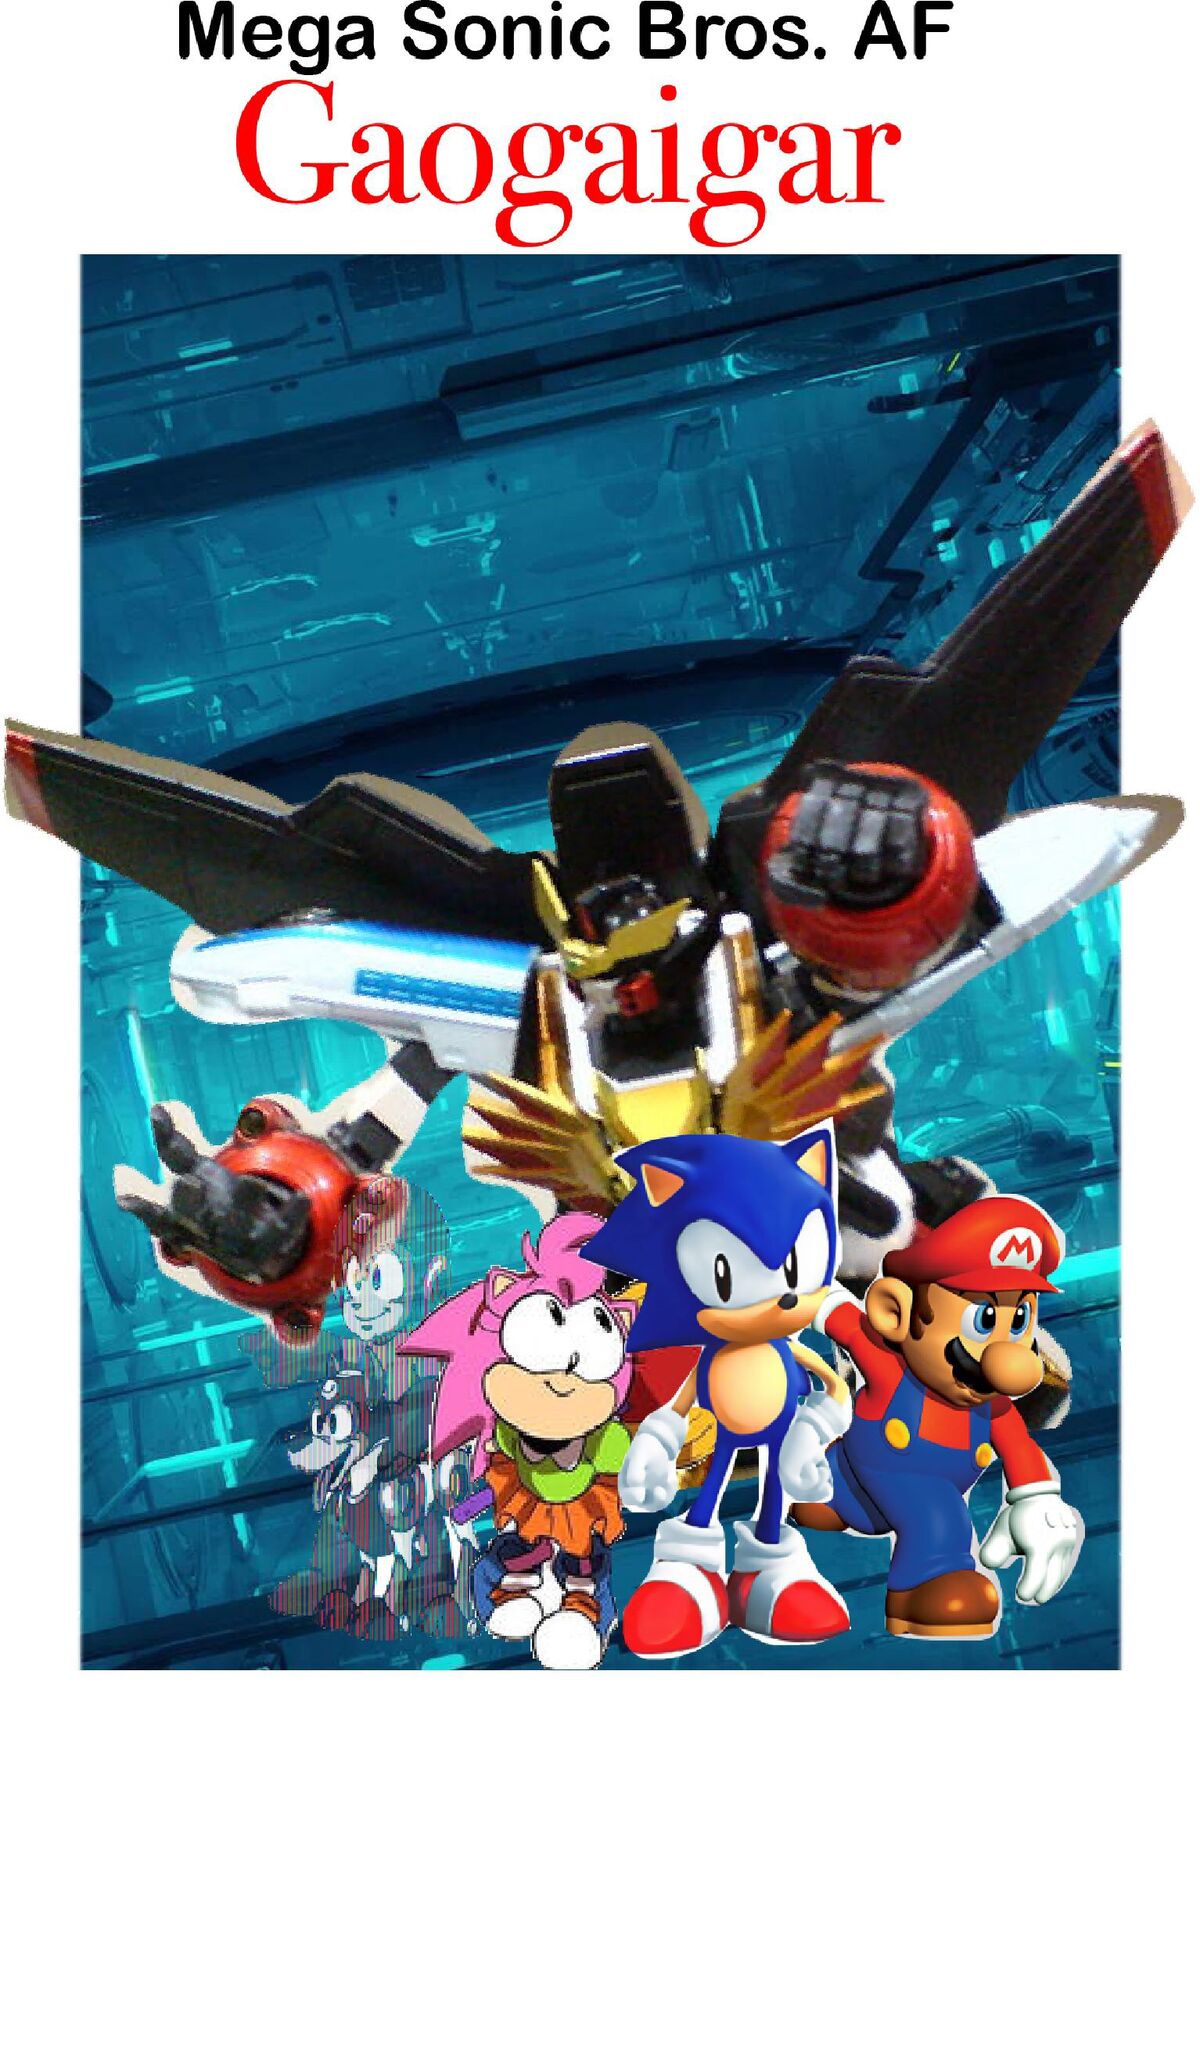 The Greatest Robot in the World  Mega Sonic Bros: The Greatest